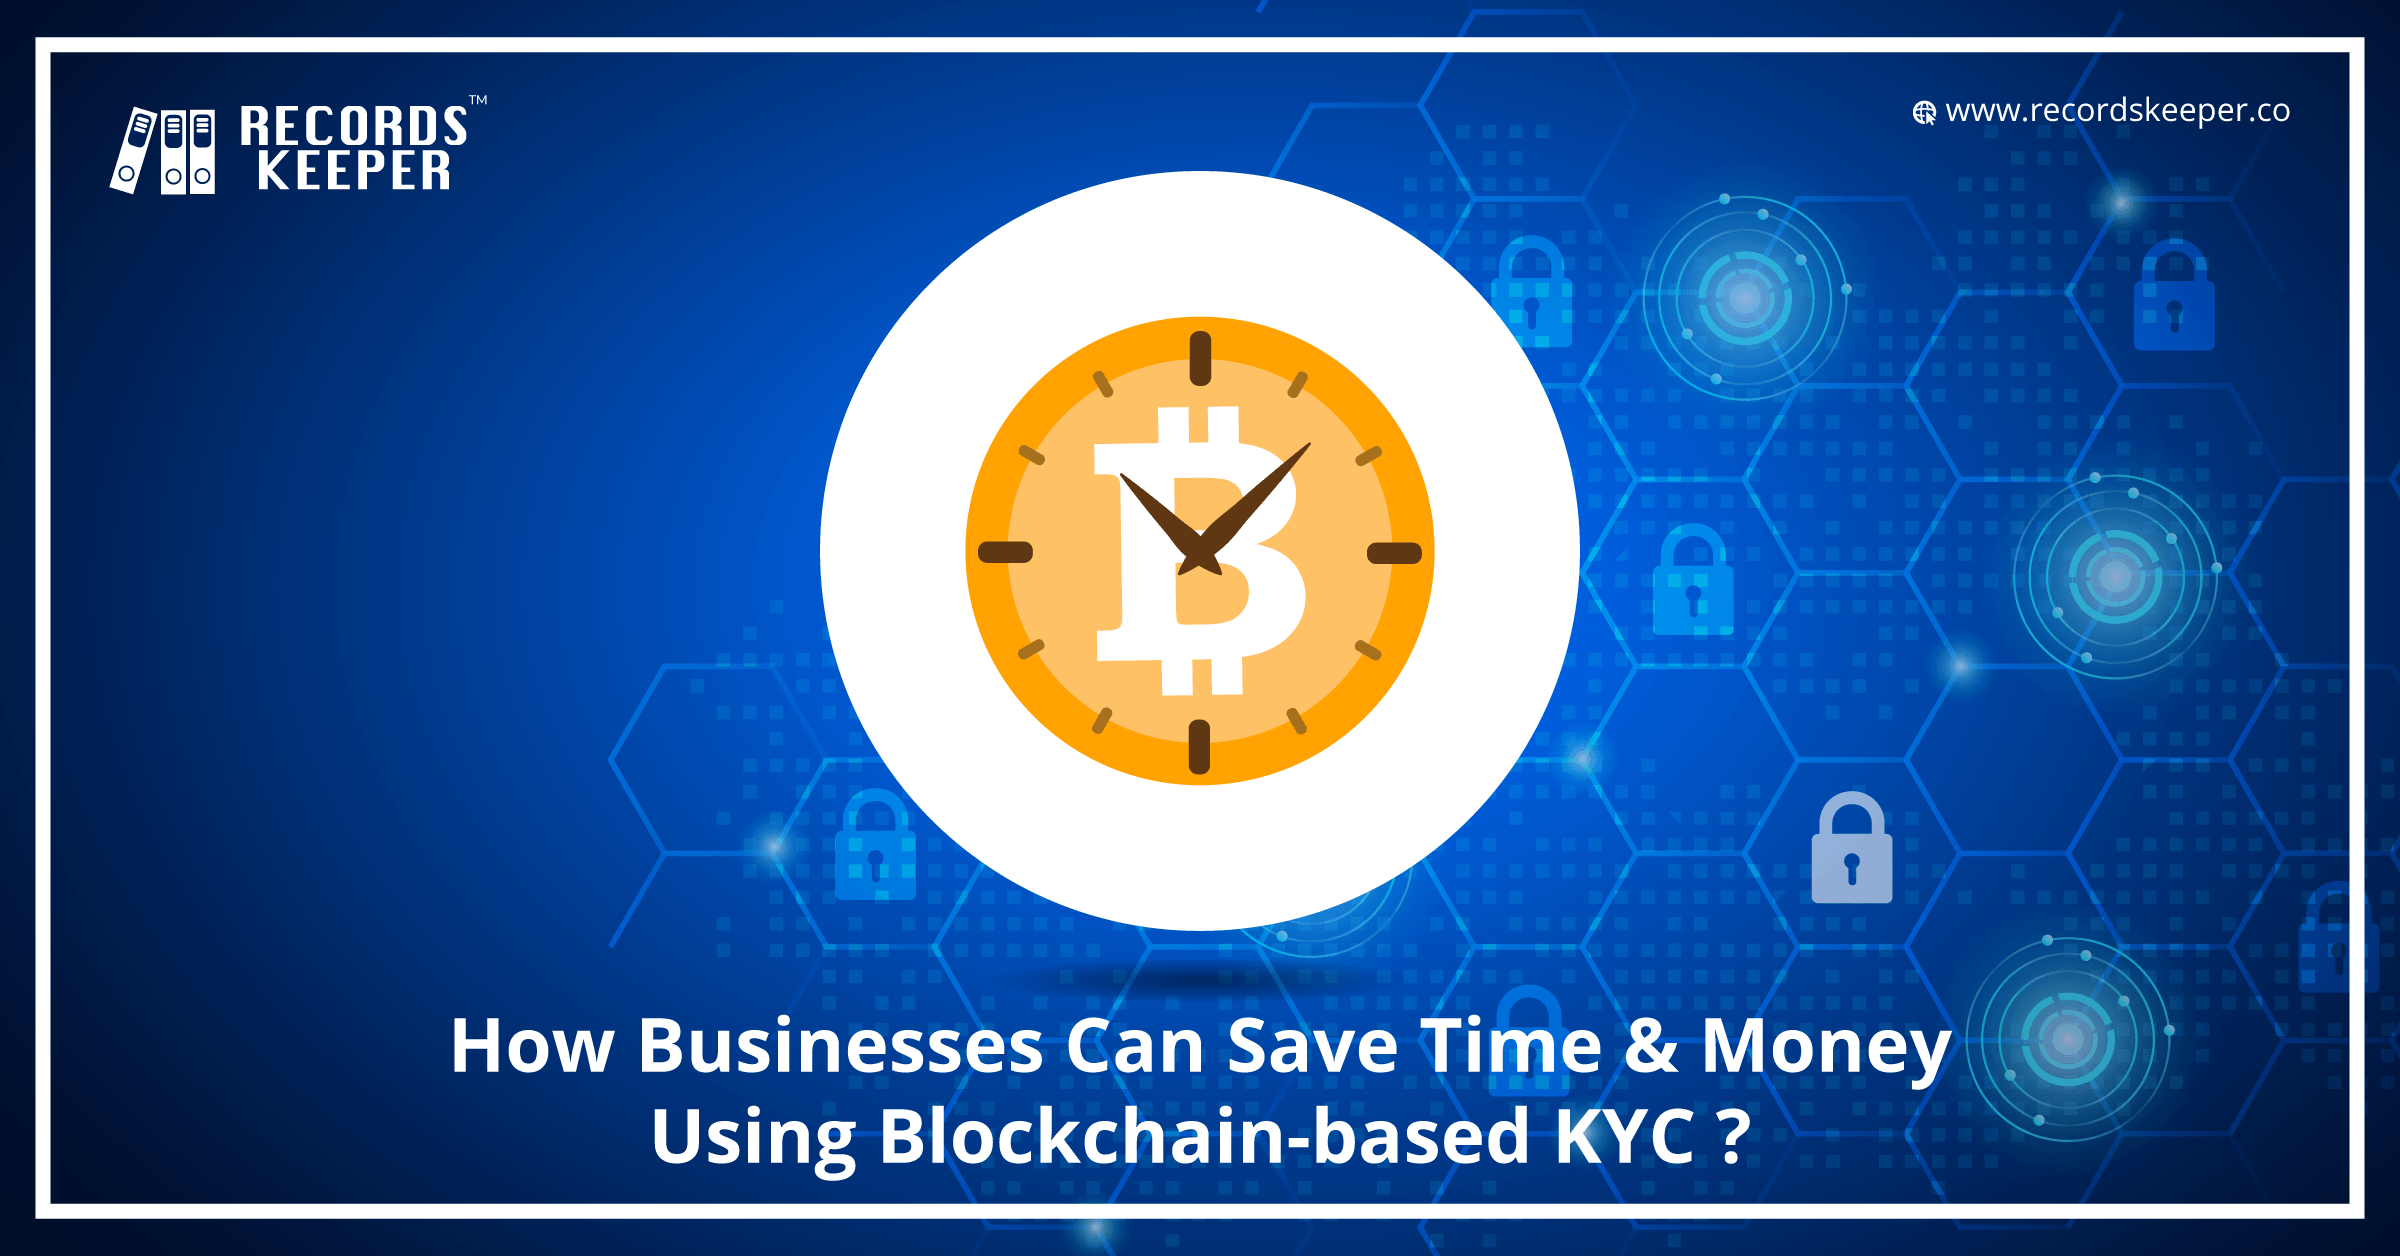 How Businesses Can Save Time & Money Using Blockchain-based KYC?